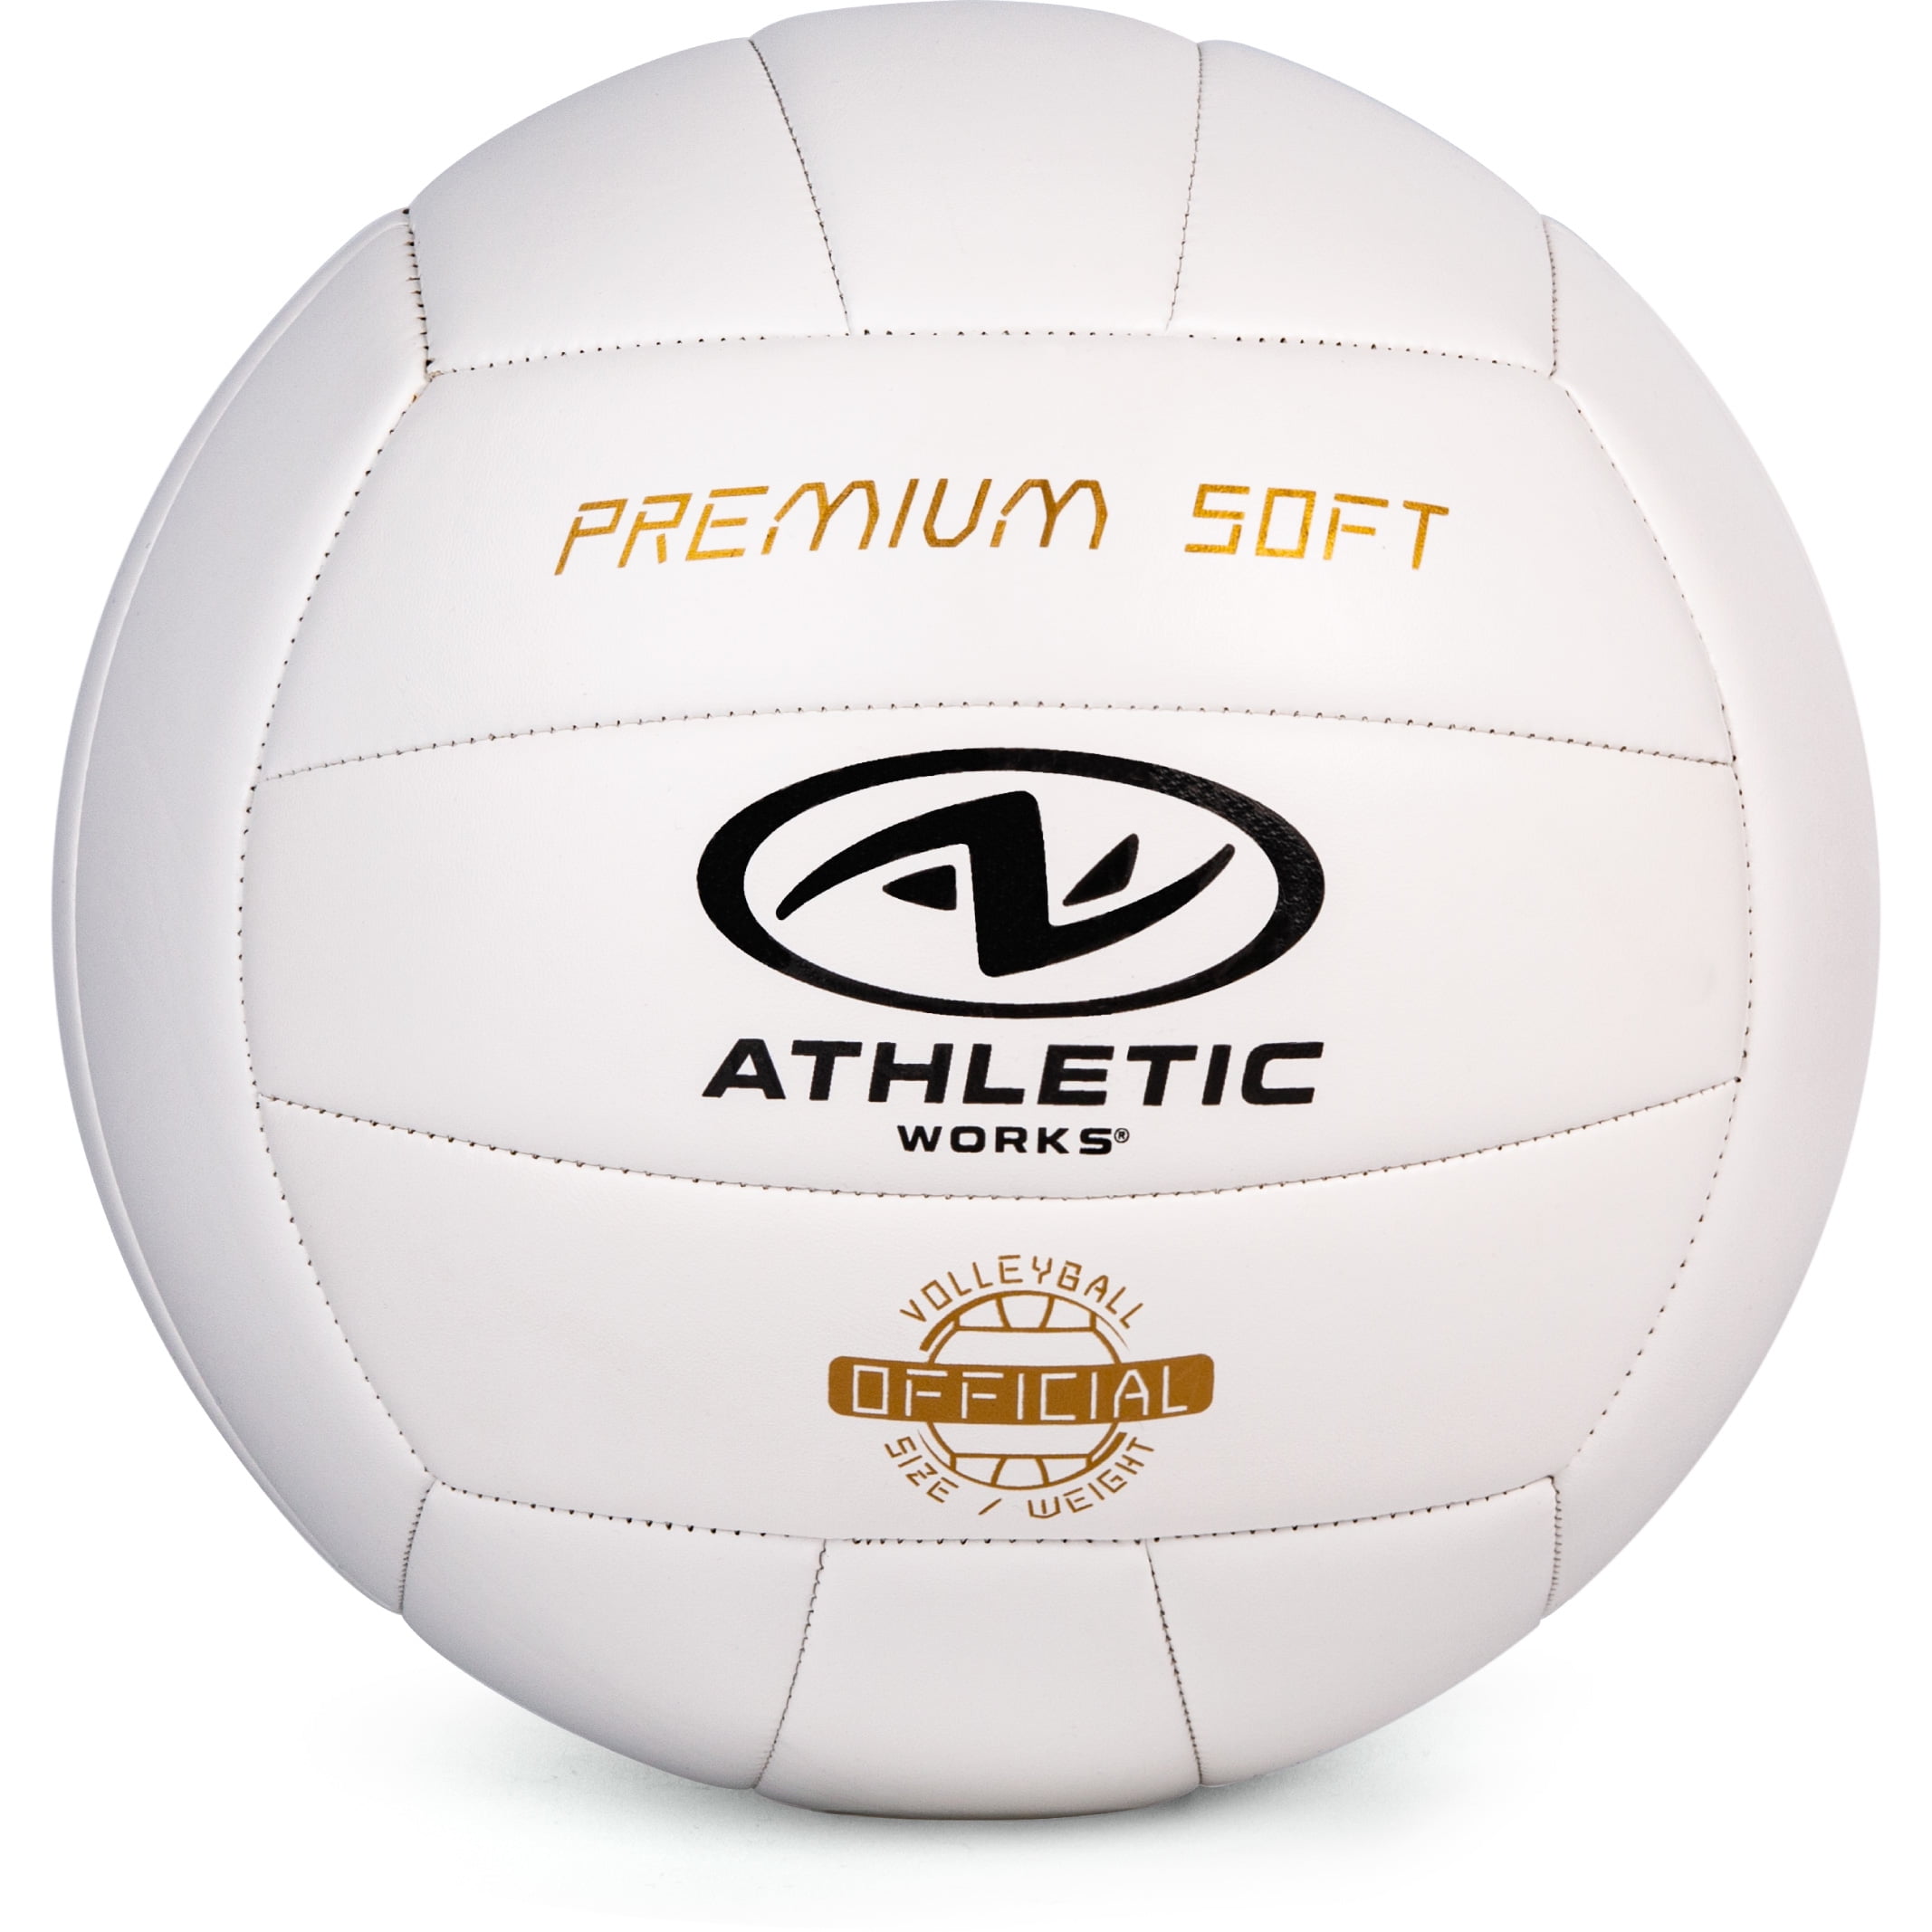 Athletic Works Size 5 Premium Soft Volleyball, White